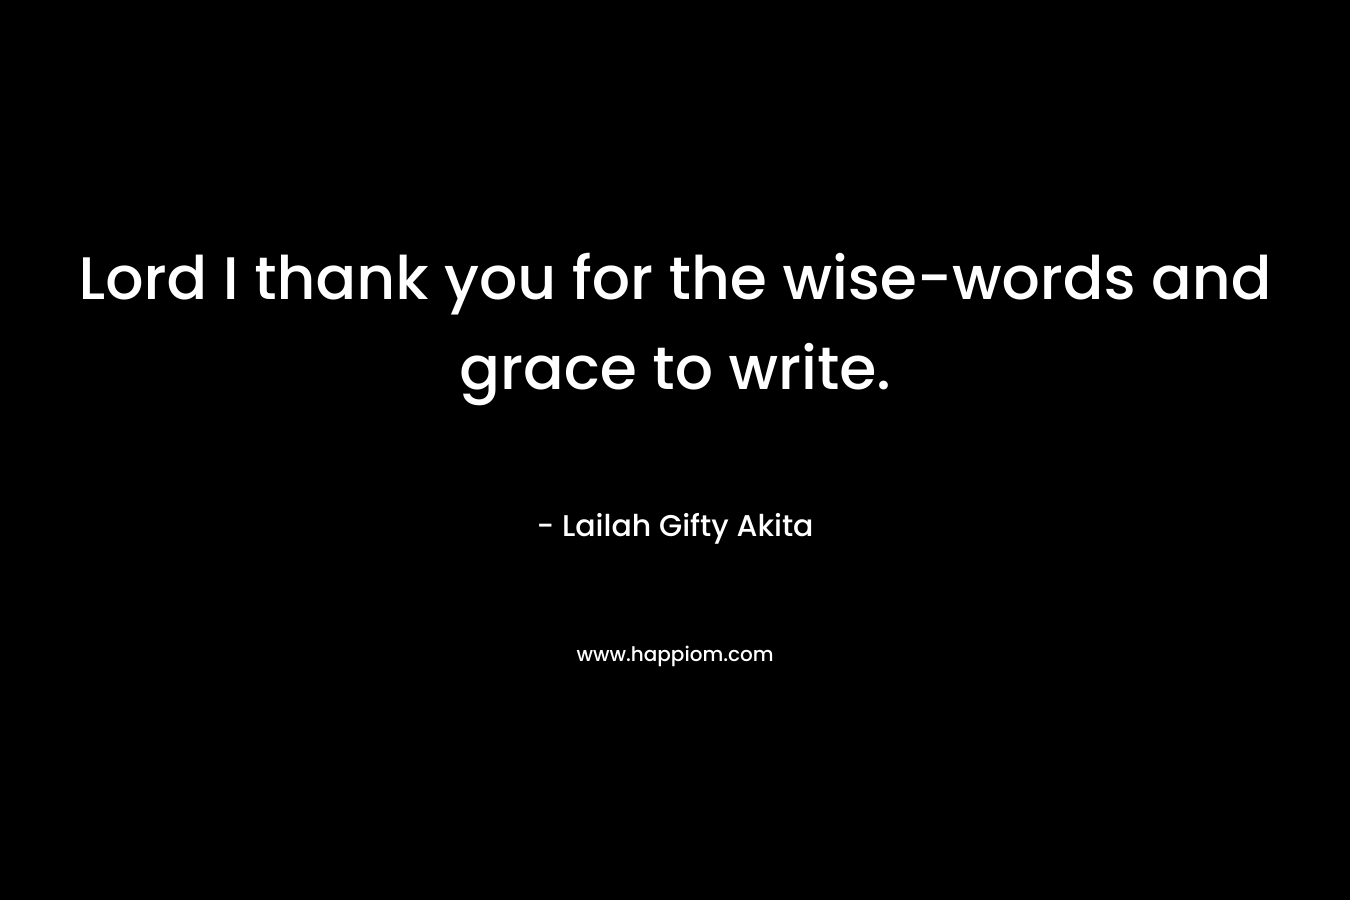 Lord I thank you for the wise-words and grace to write.